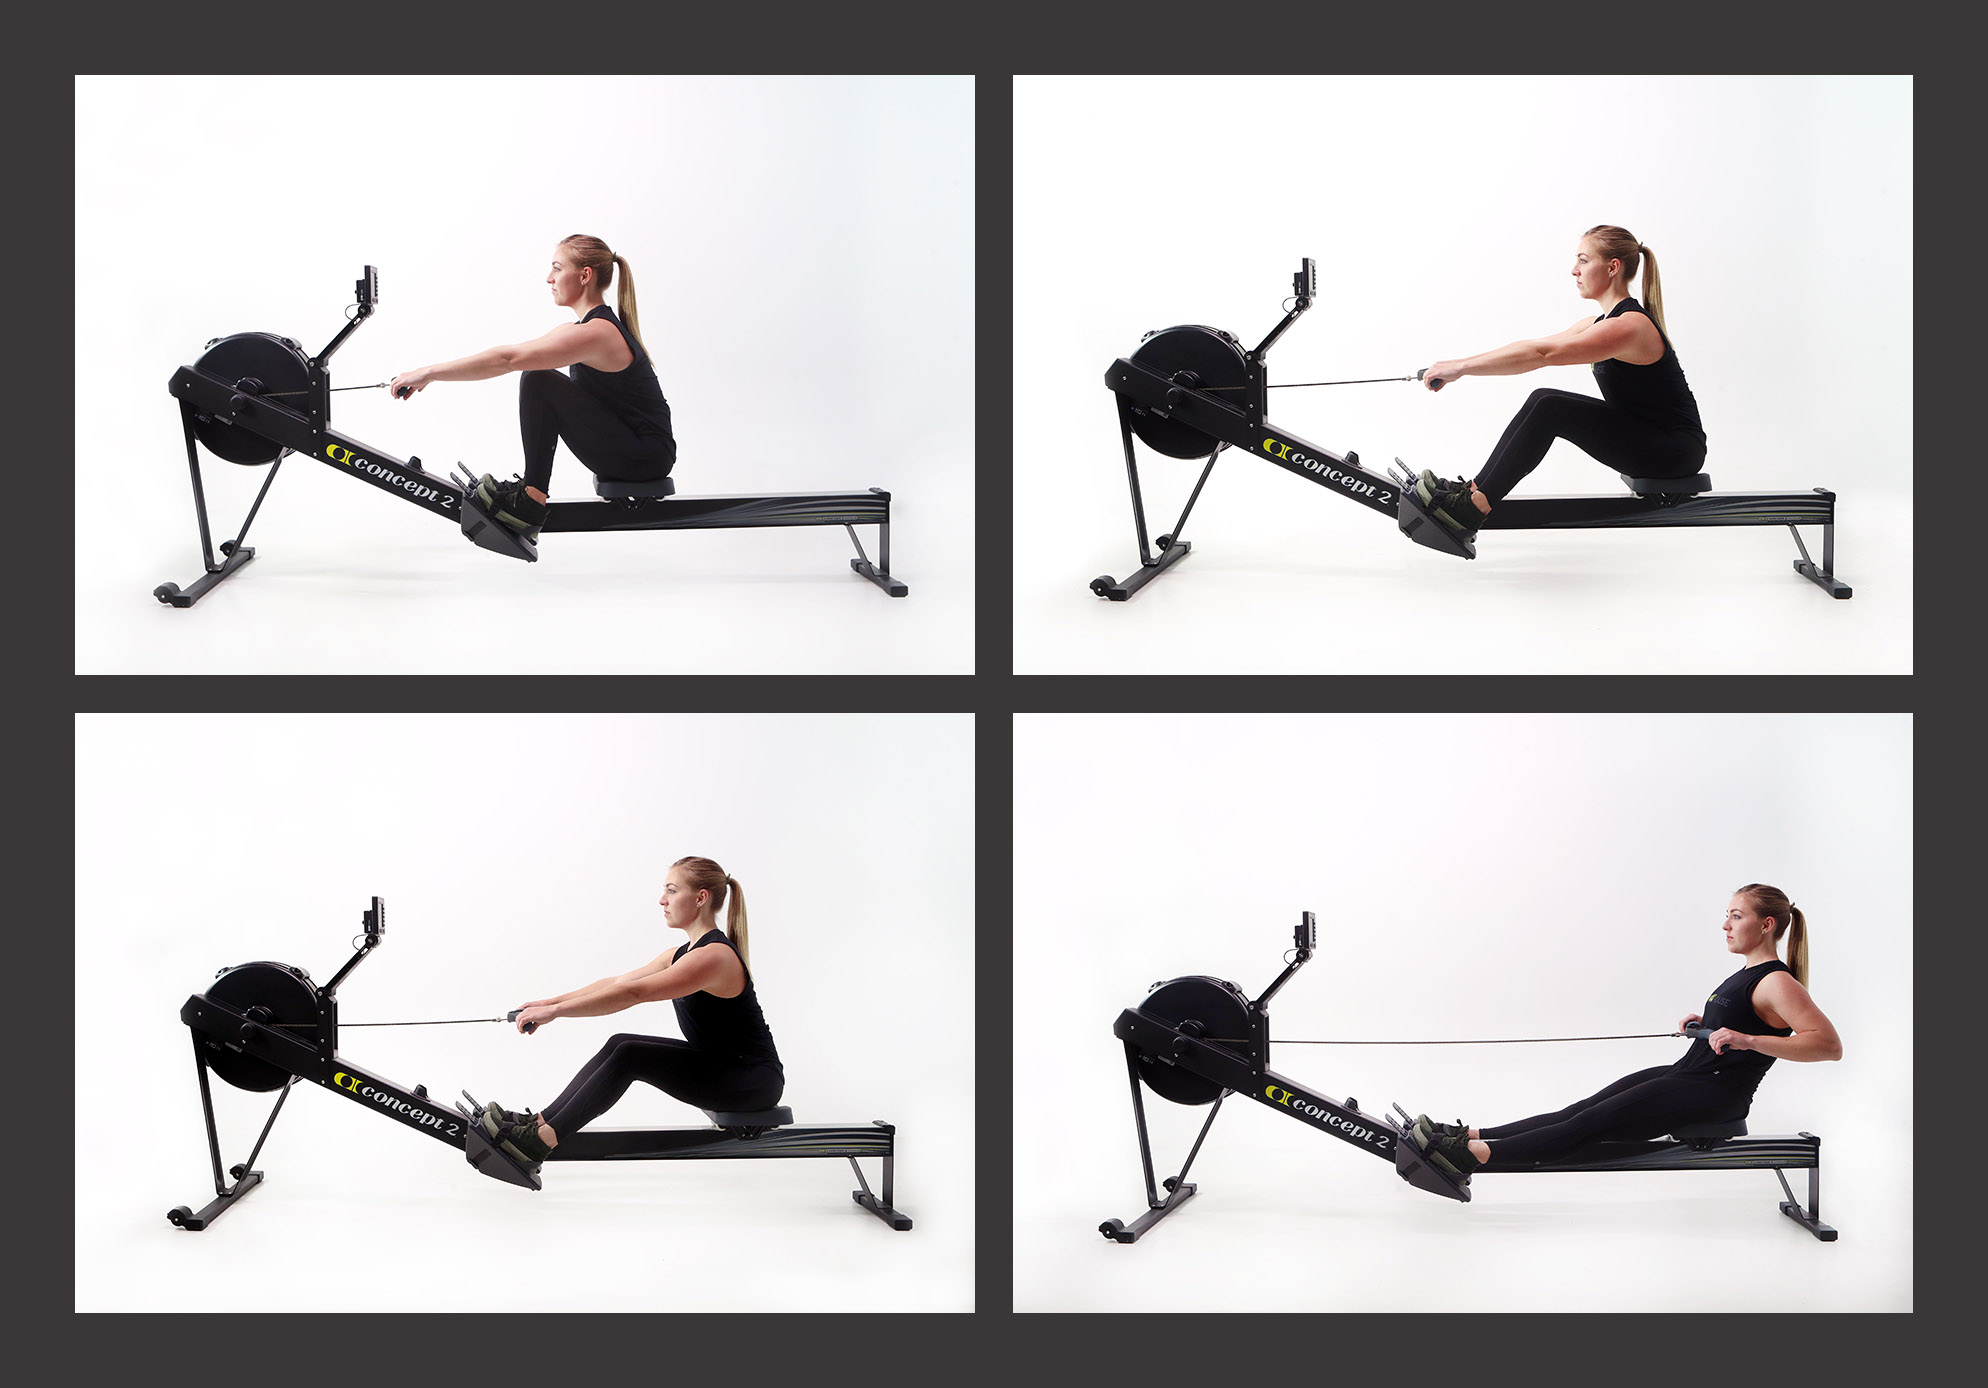 XPRO Caley performing proper rower form in four steps